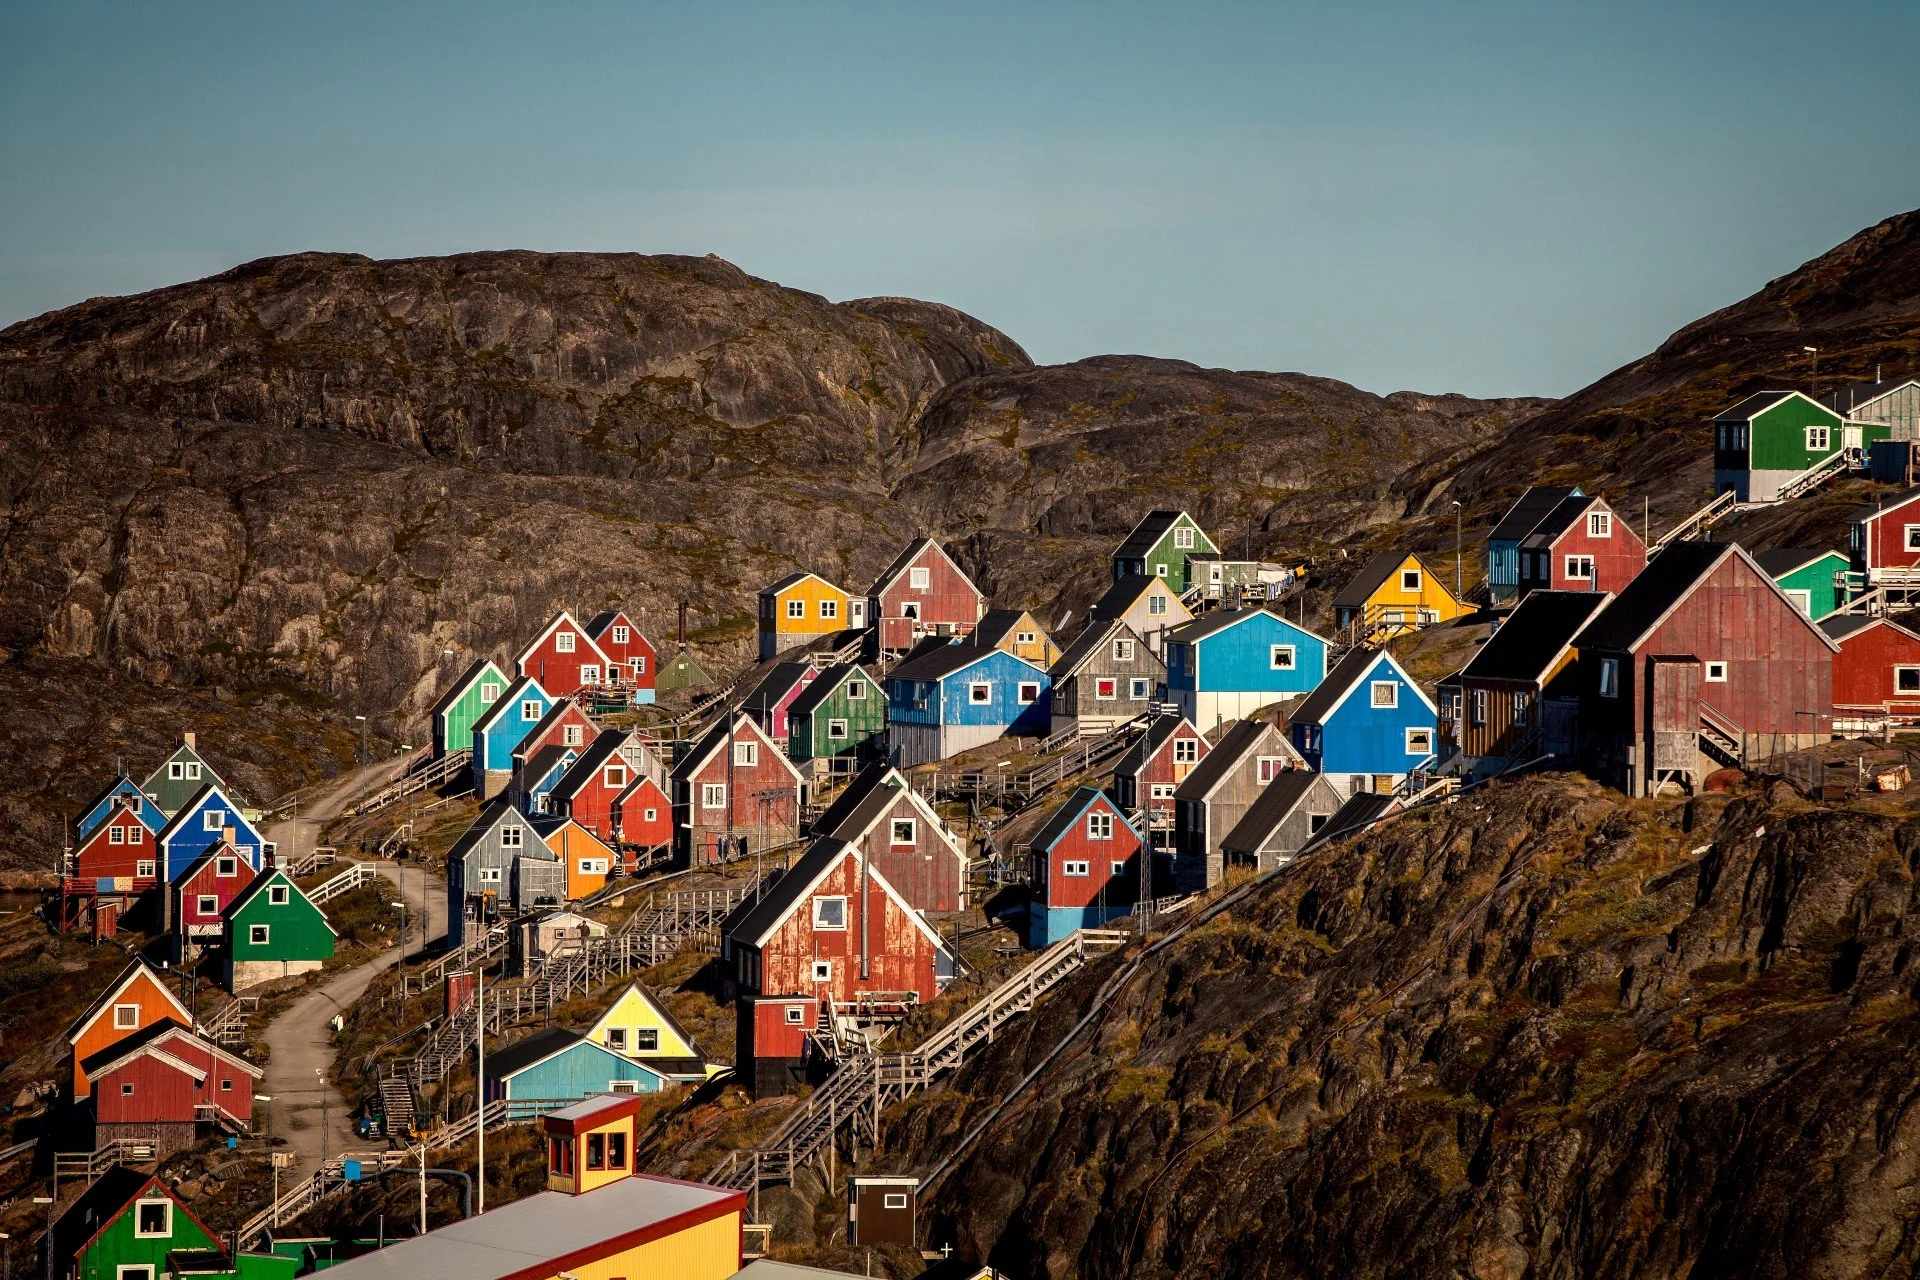 kangaamiut-a-typical-view-of-kangaamiut-a-village-in-greenland